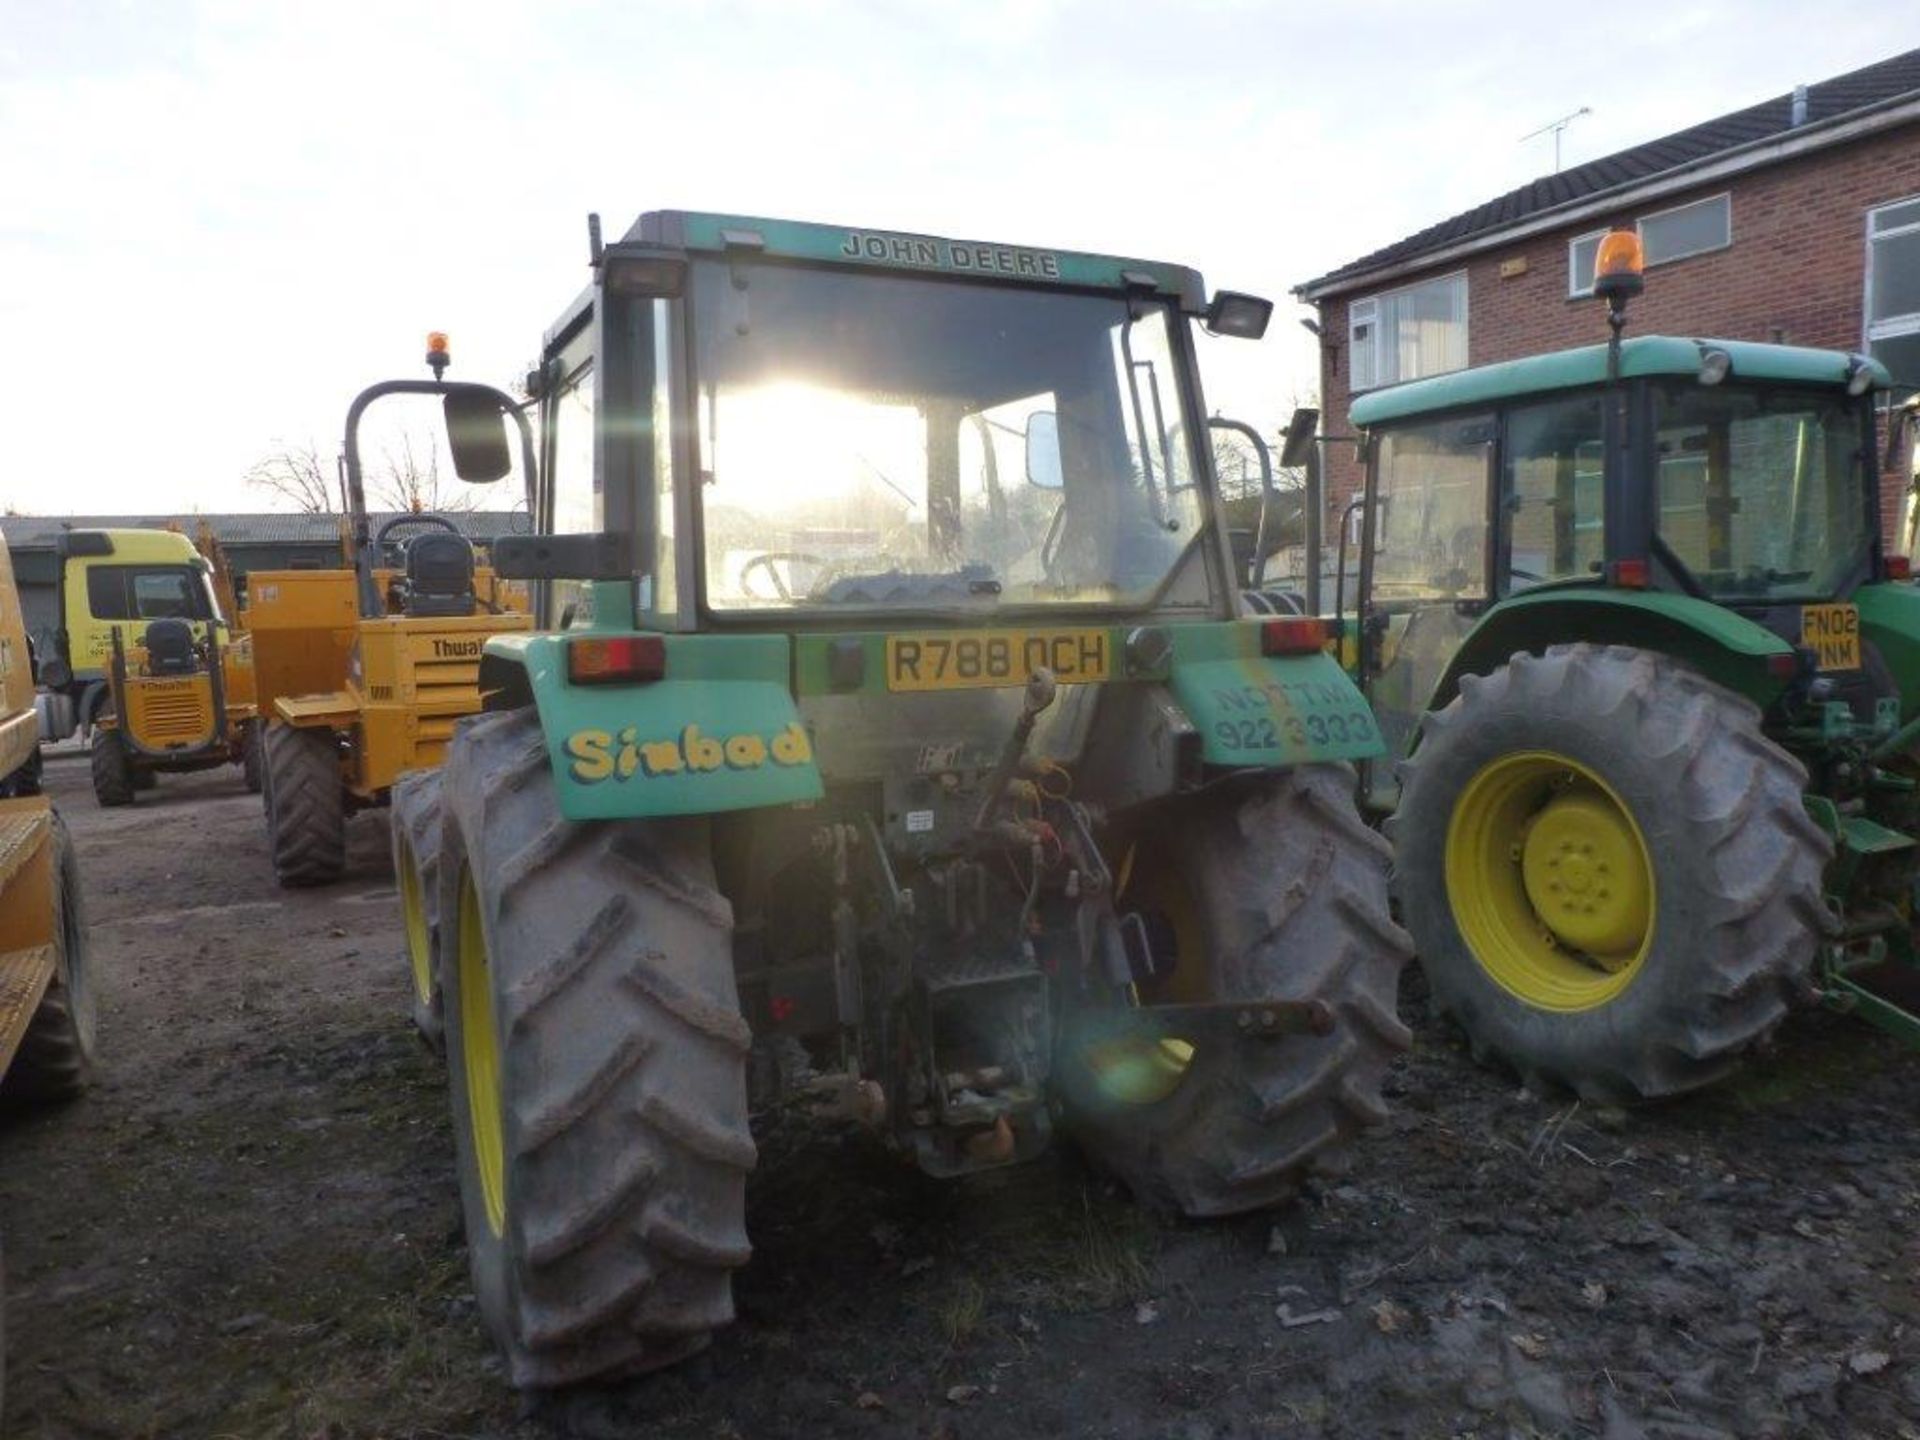 John Deere type 3200 4x4 tractor (1997), indicated hours 3195.6, Regn. no. R788 OCH (Plant no. 650) - Image 3 of 3